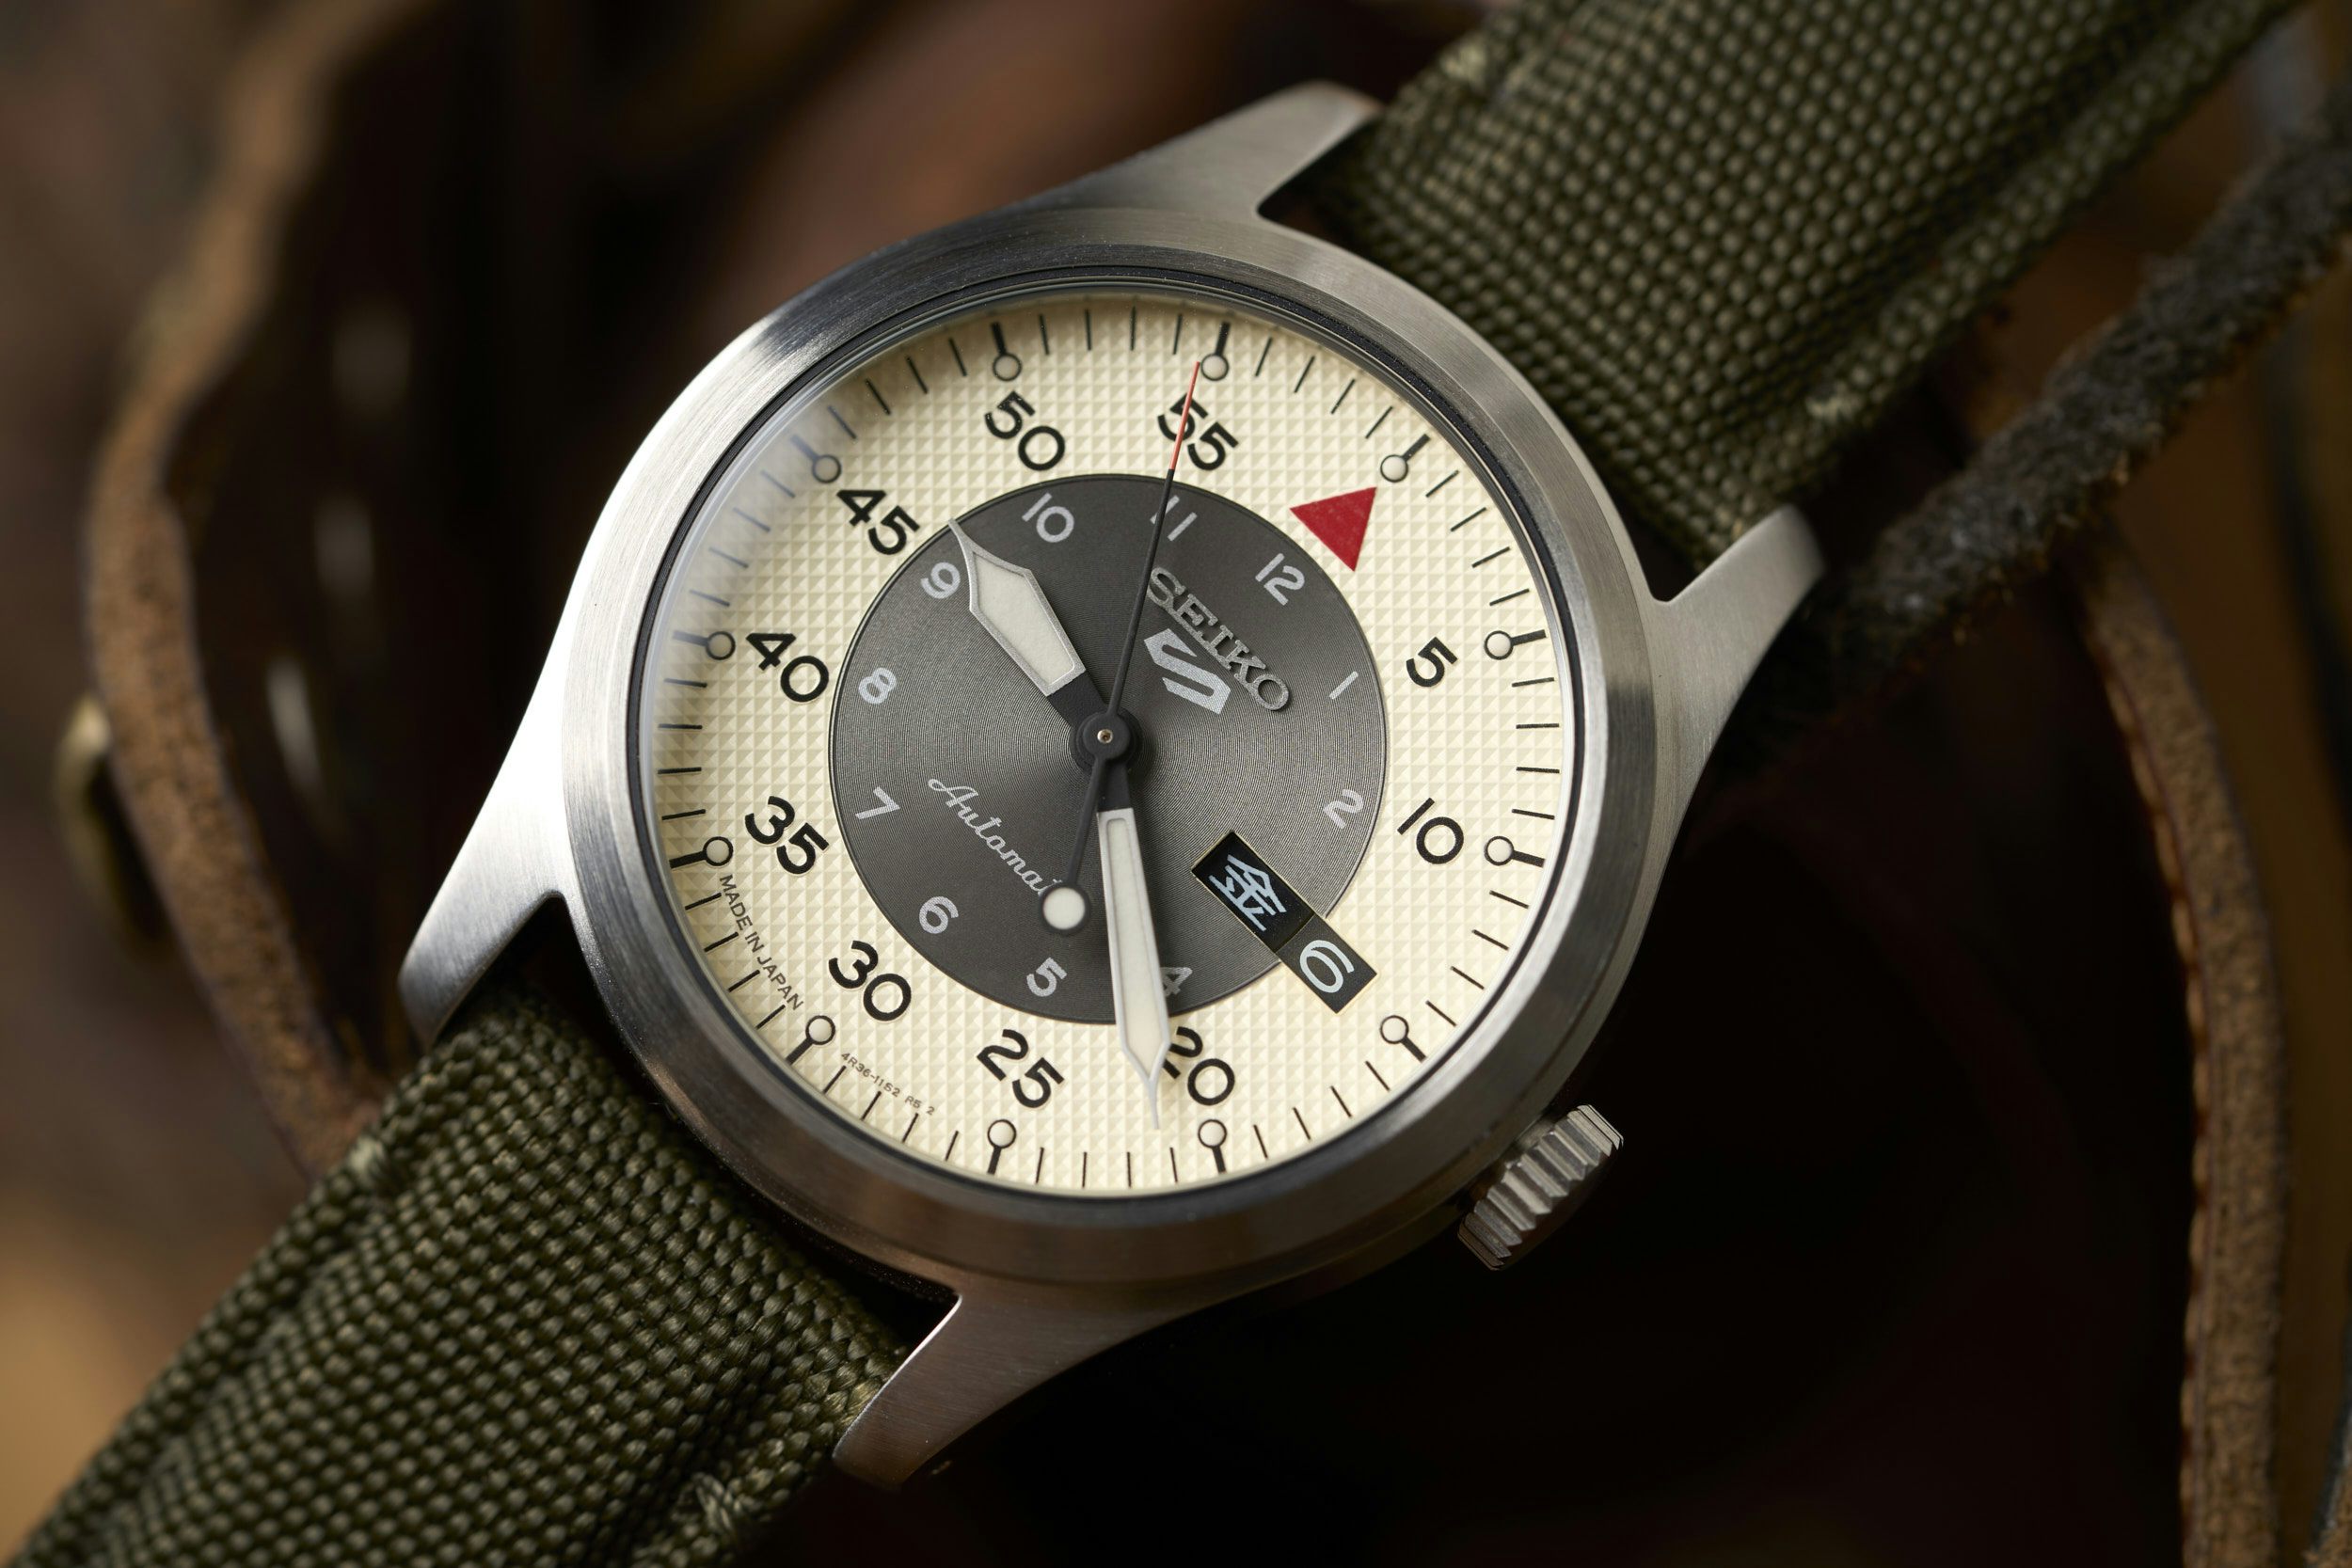 Worn & Wound Celebrates 10 Years With A Limited Edition Seiko 5